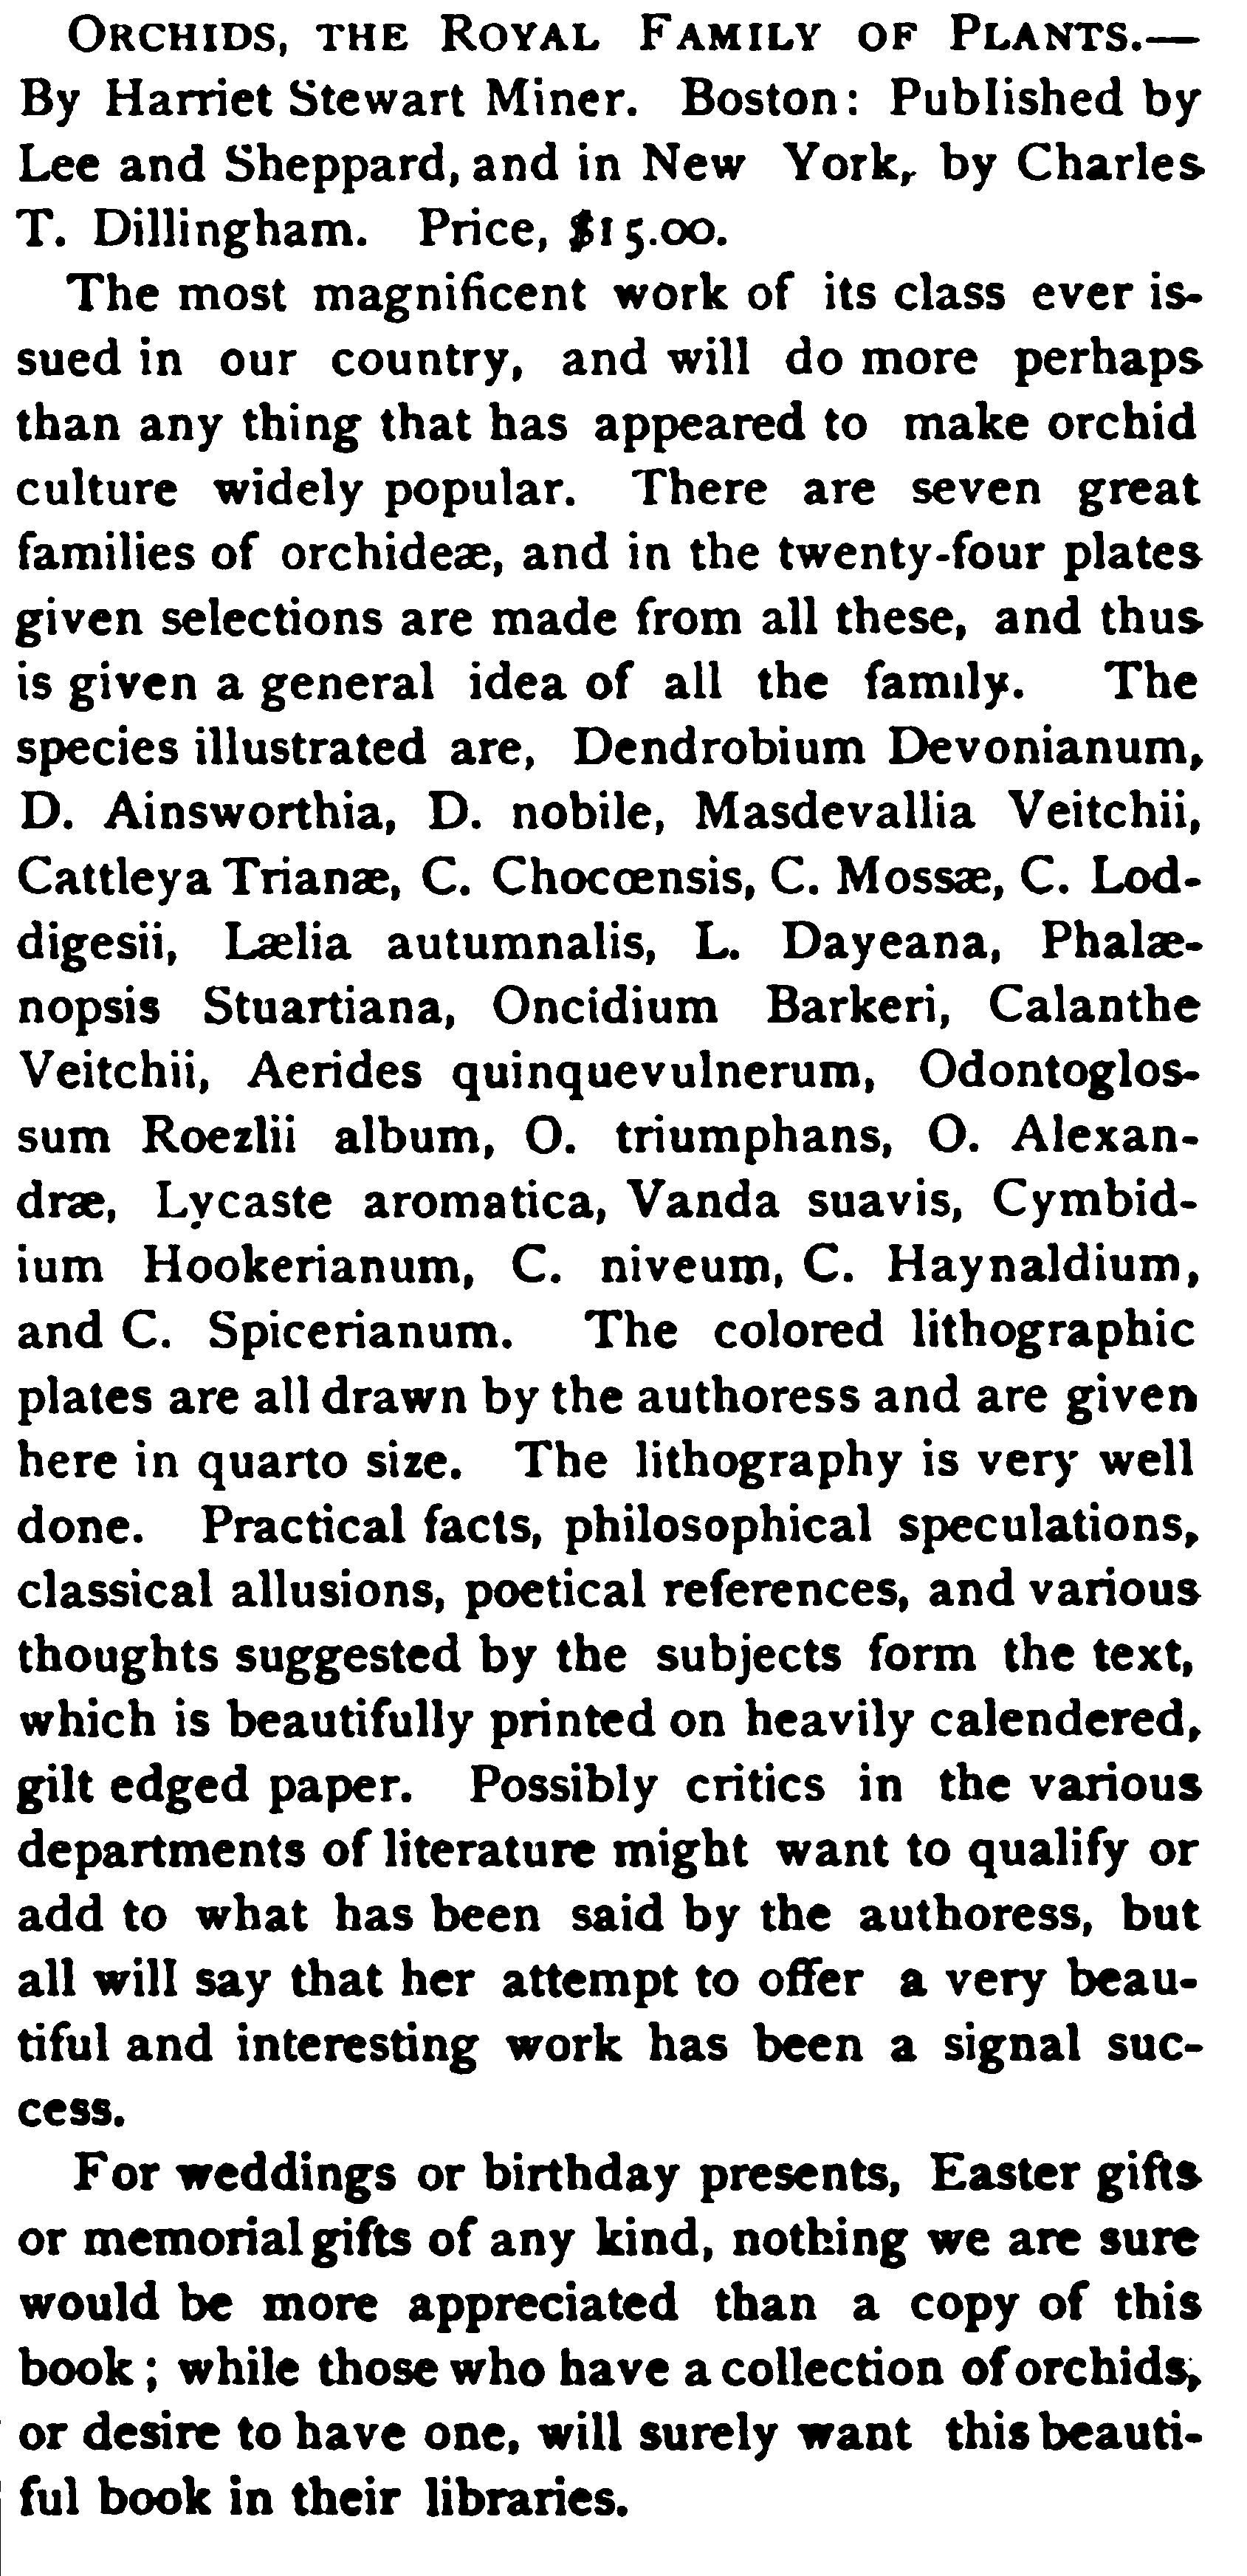 Gardeners_Monthly_and_Horticulturist_V27-1885-harriet-stewart-miner-orchids-the_royal_family_of_plants-review.png